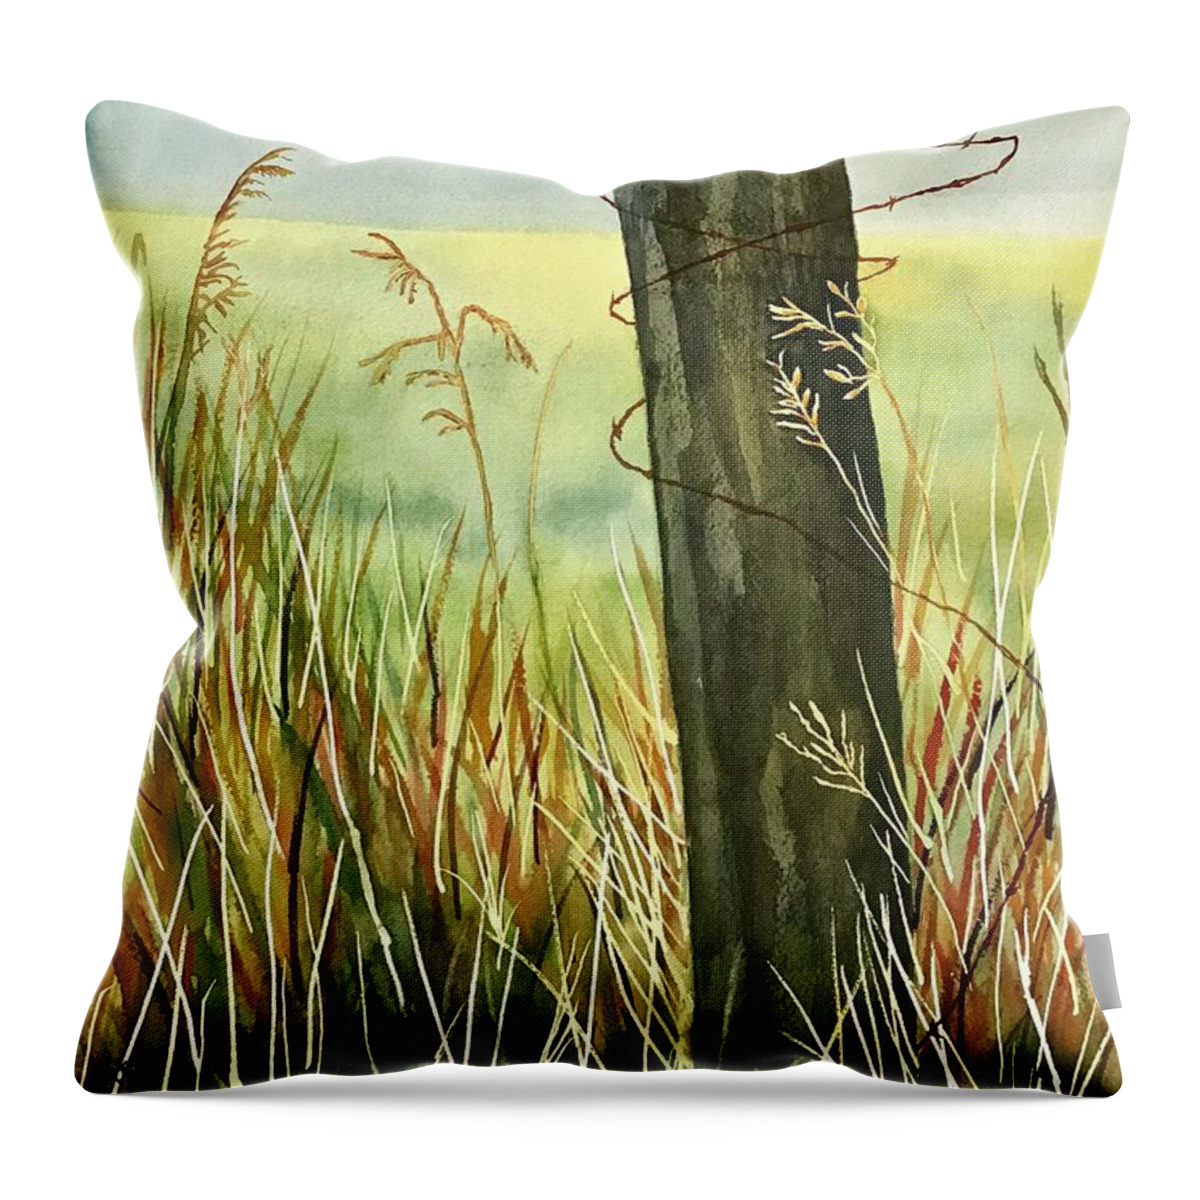 Fence Throw Pillow featuring the painting Forgotten by Beth Fontenot